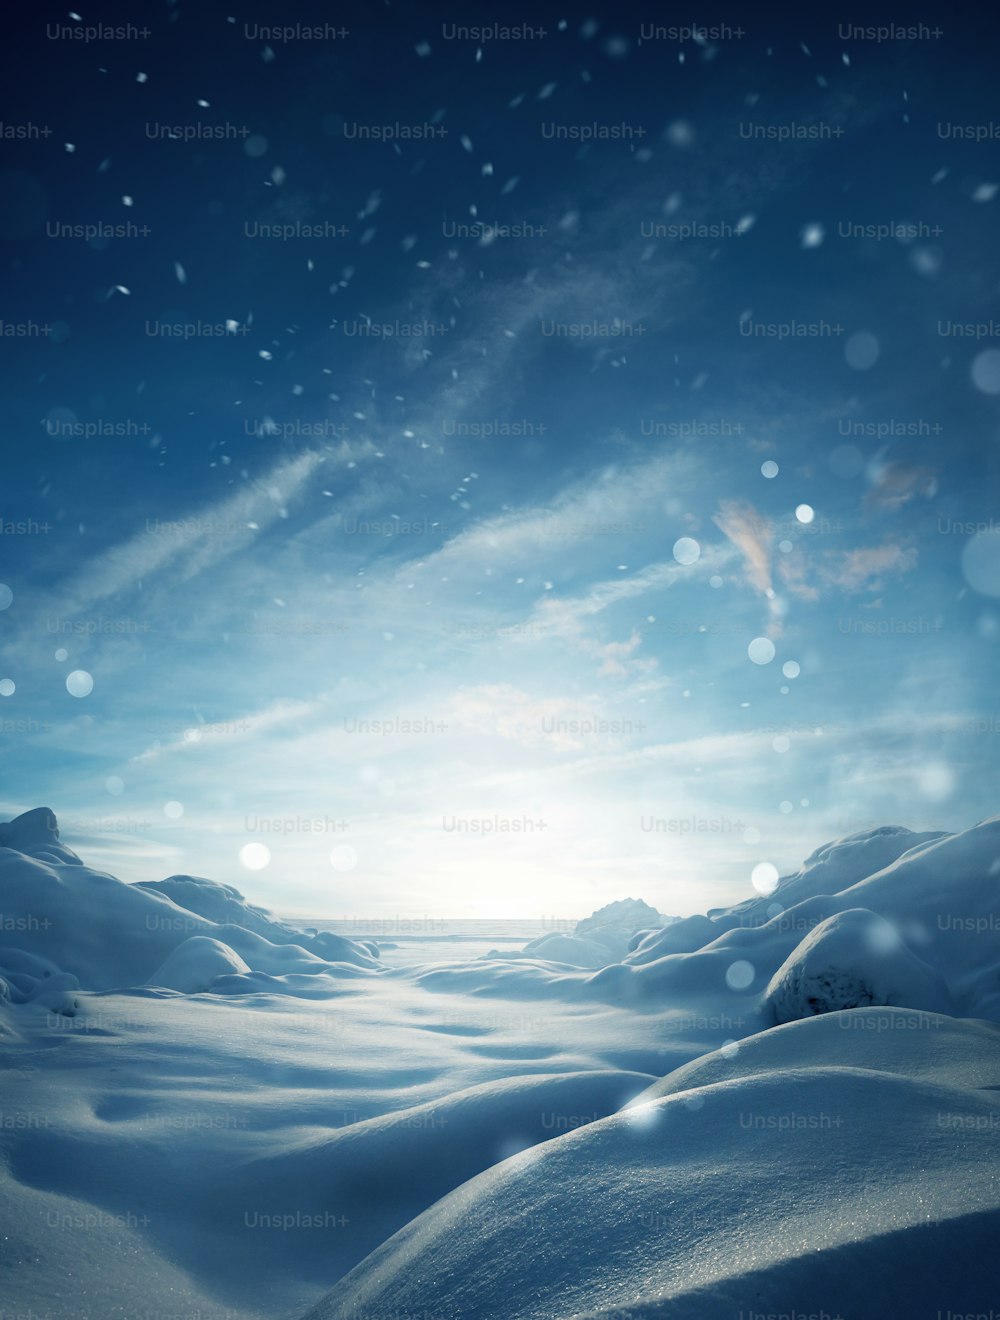 A mystical winter snow covered landscape christmas background with particles of snow falling.